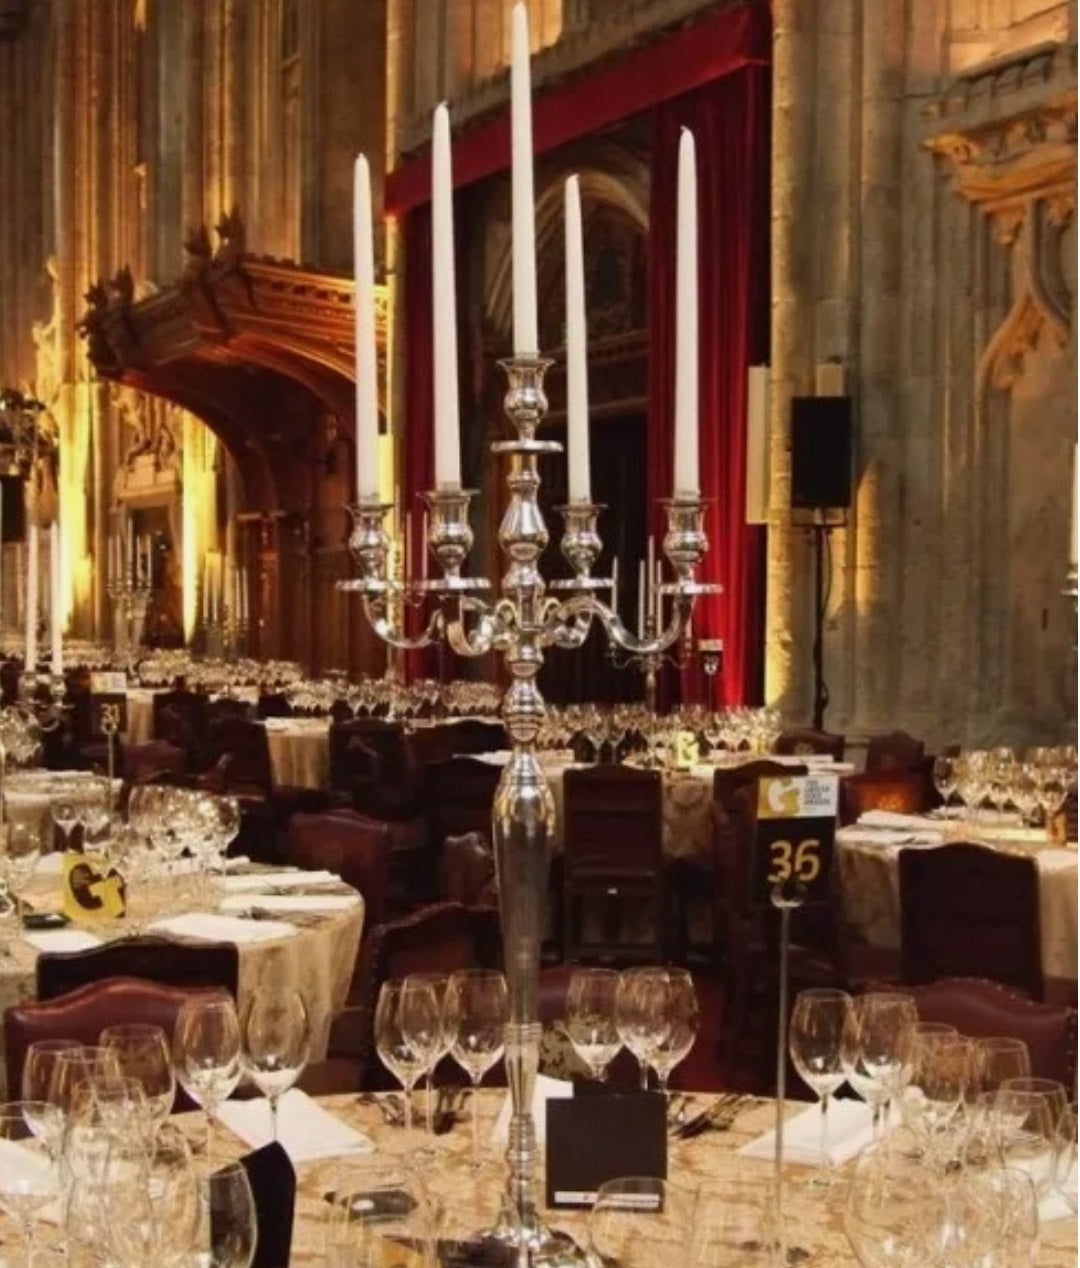 40 INCH OR 3 Foot Tall Floor Candelabra Candle Holder Silver